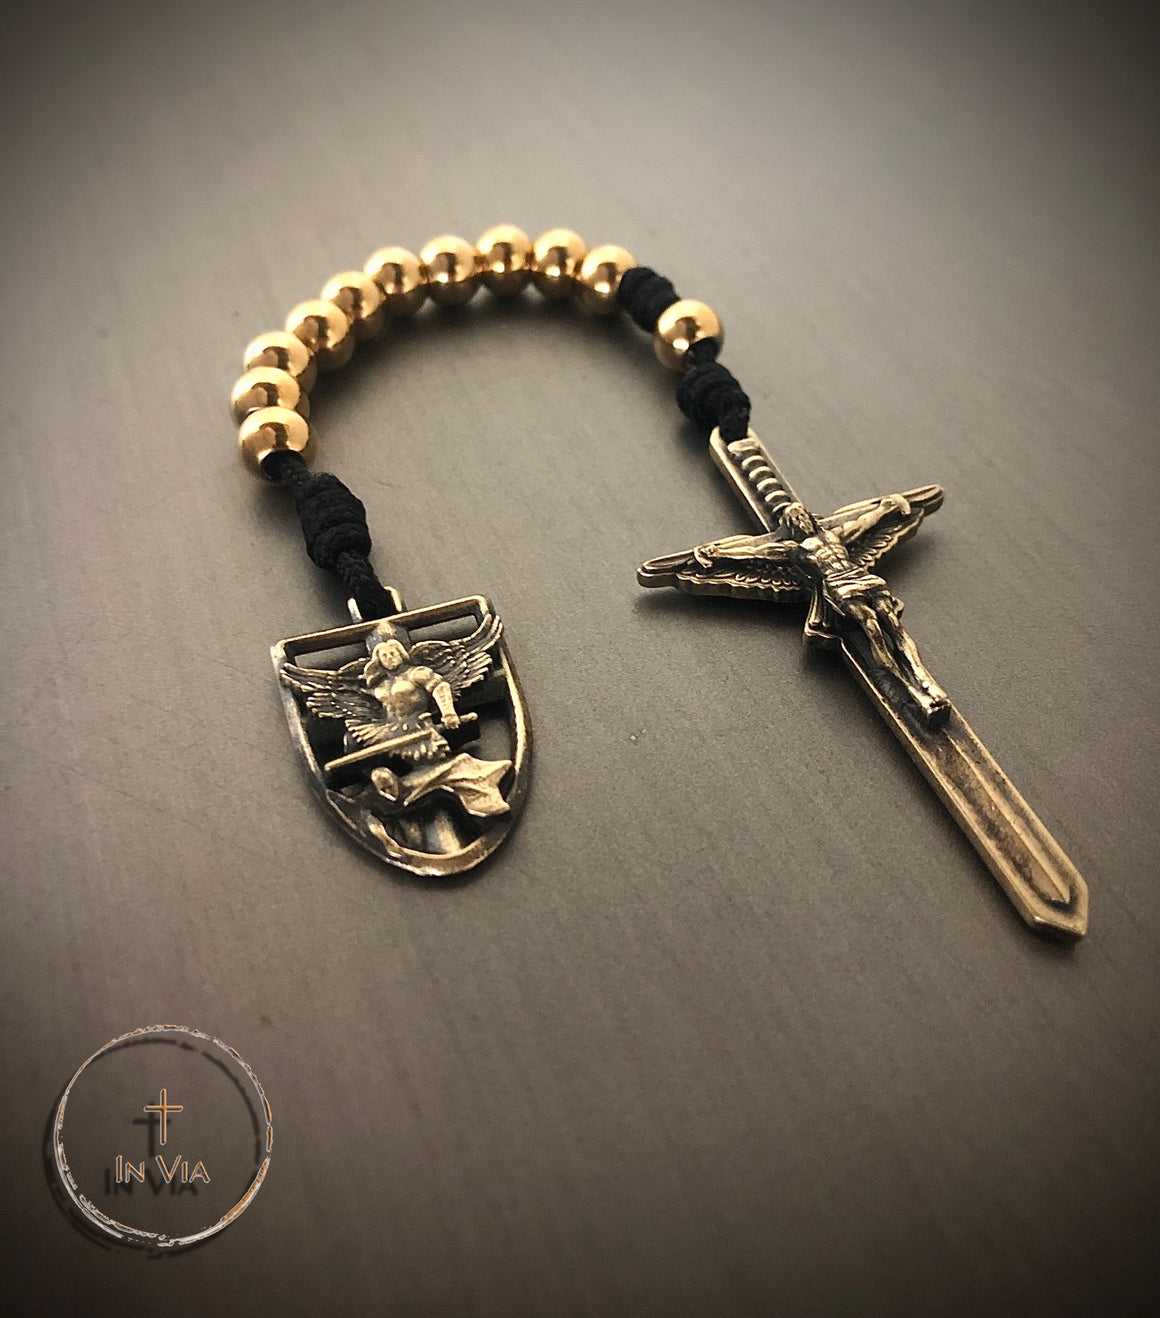 In Via St. Michael Defender Prayer Cord -Solid Bronze with Gold